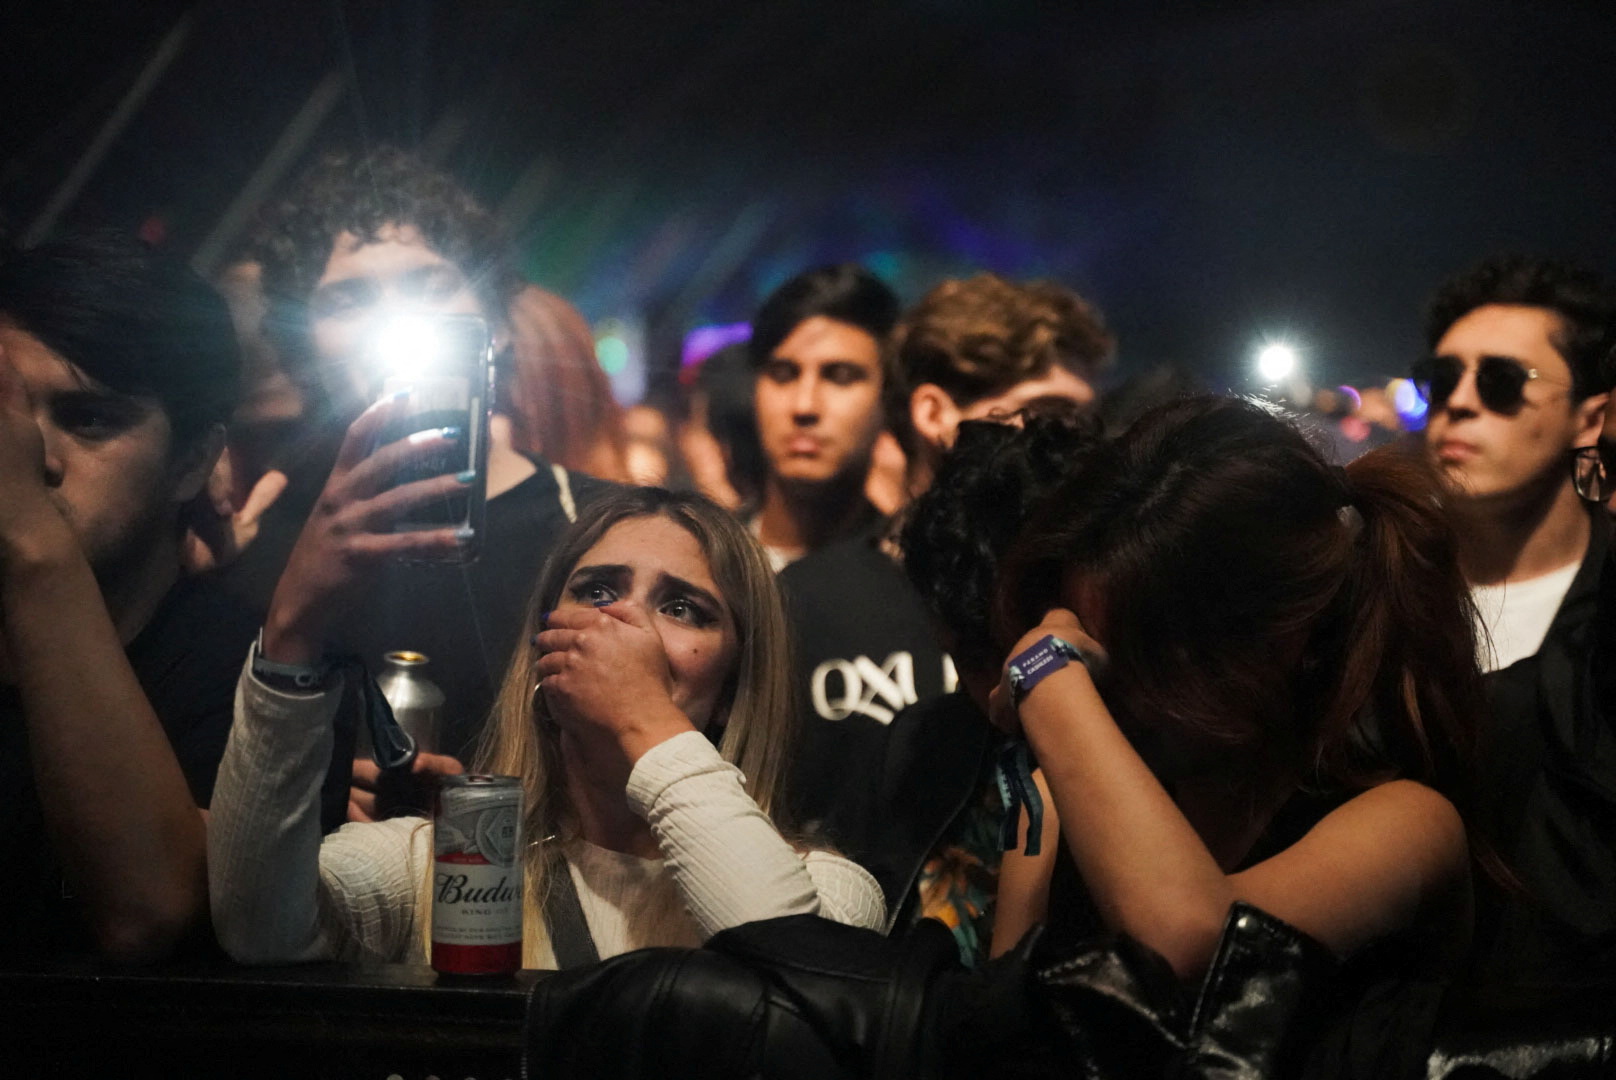 Attendees could not hide their feelings at the loss of one of their musical idols in bogota, colombia, march 25, 2022. Photo taken from reuters/nathalia angarita